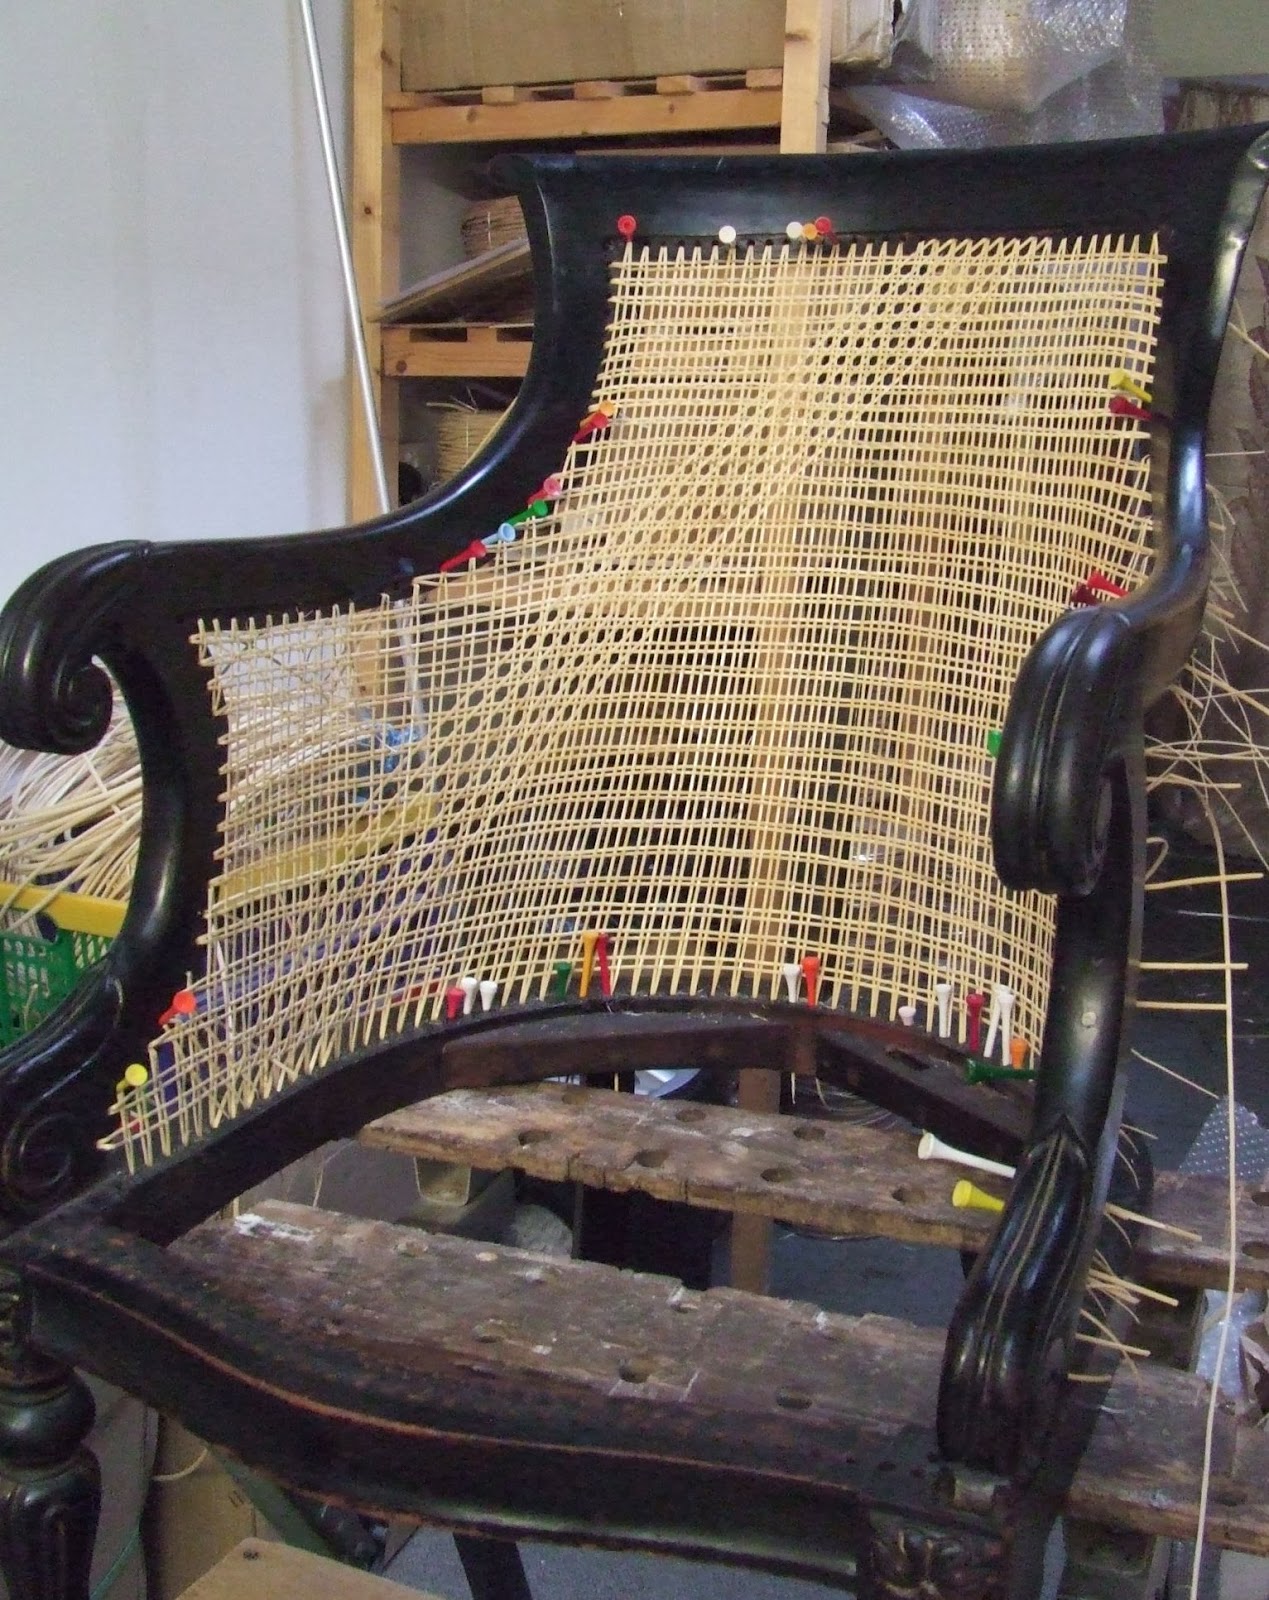 Former Glory Seat Weaving: A Whirlwind of Weaving and Weather.